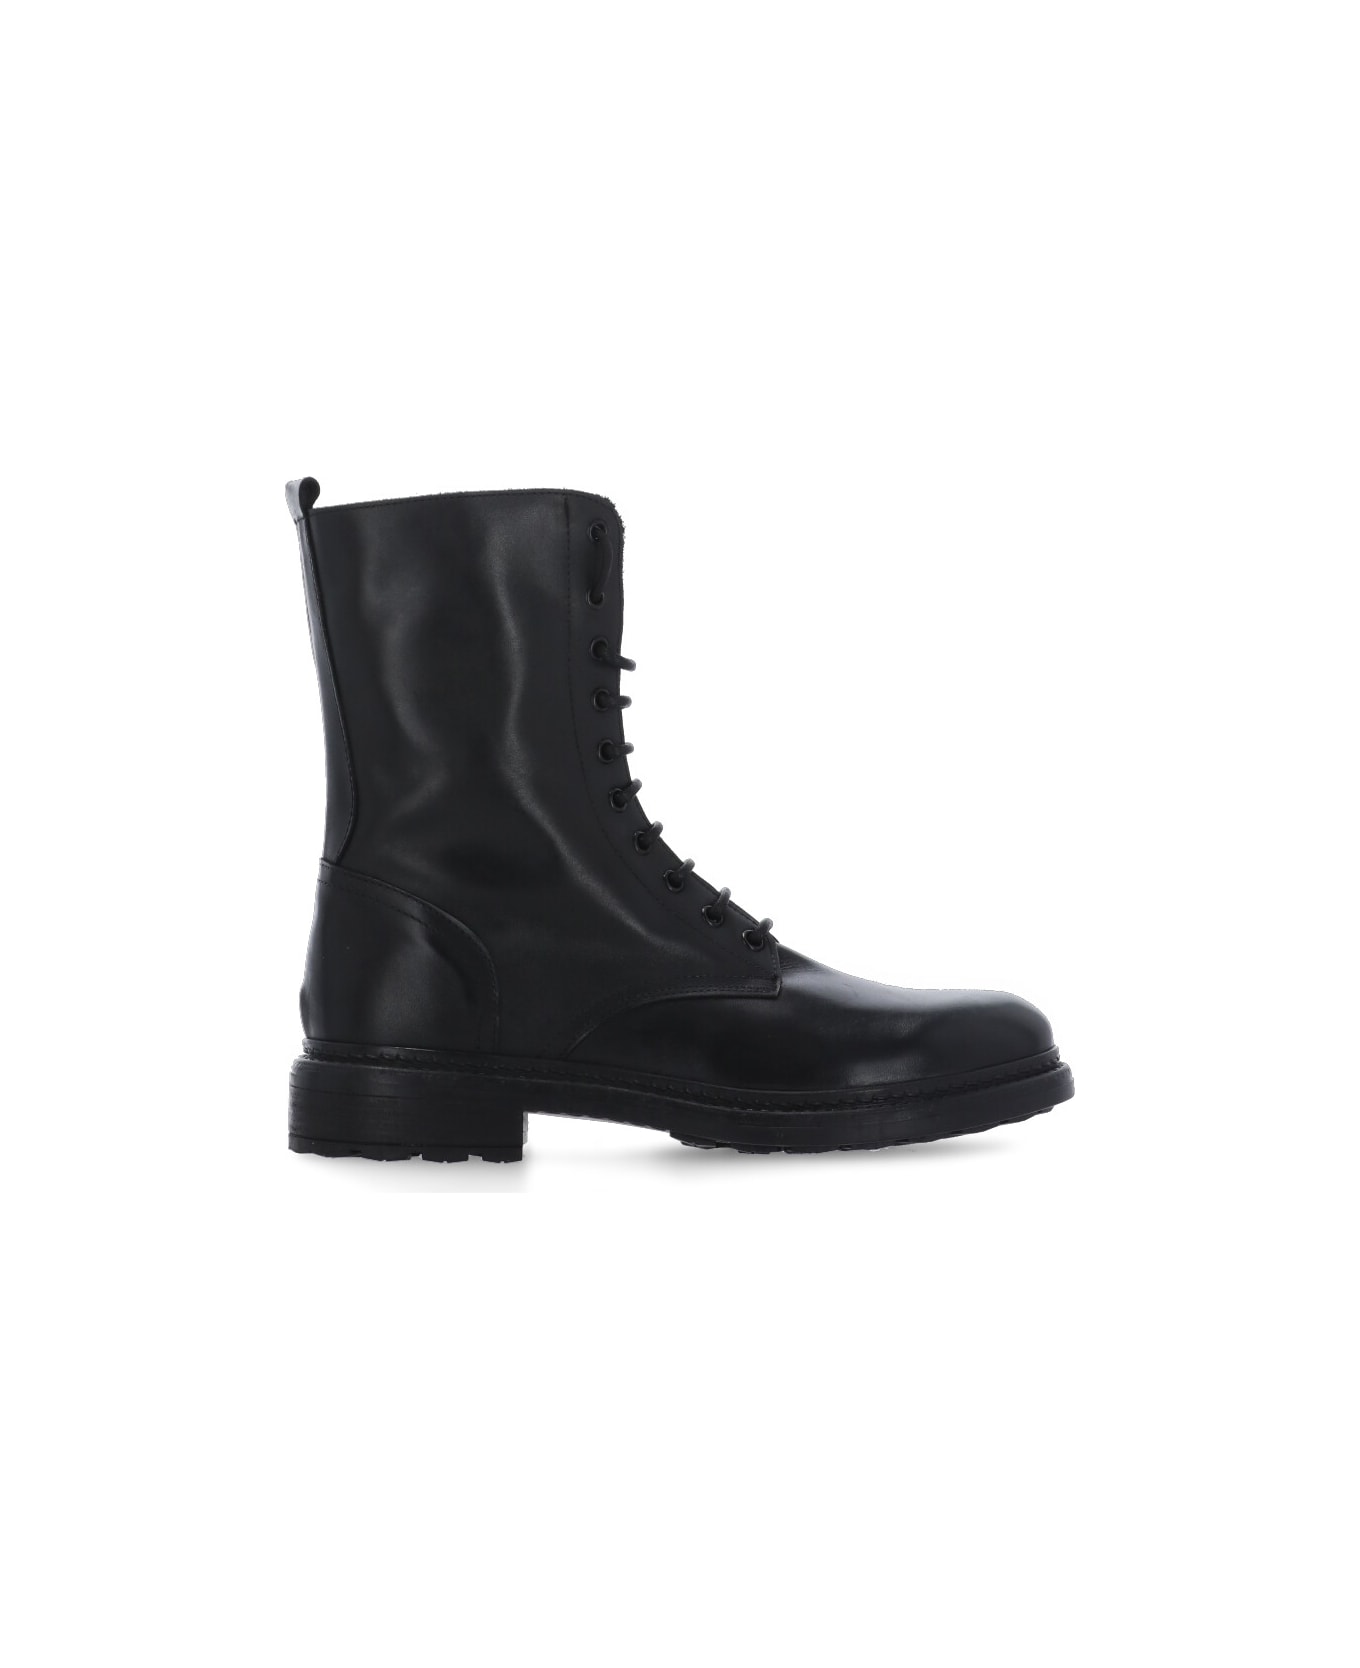 Julie Dee Smooth Leather Ankle Boots - Black ブーツ